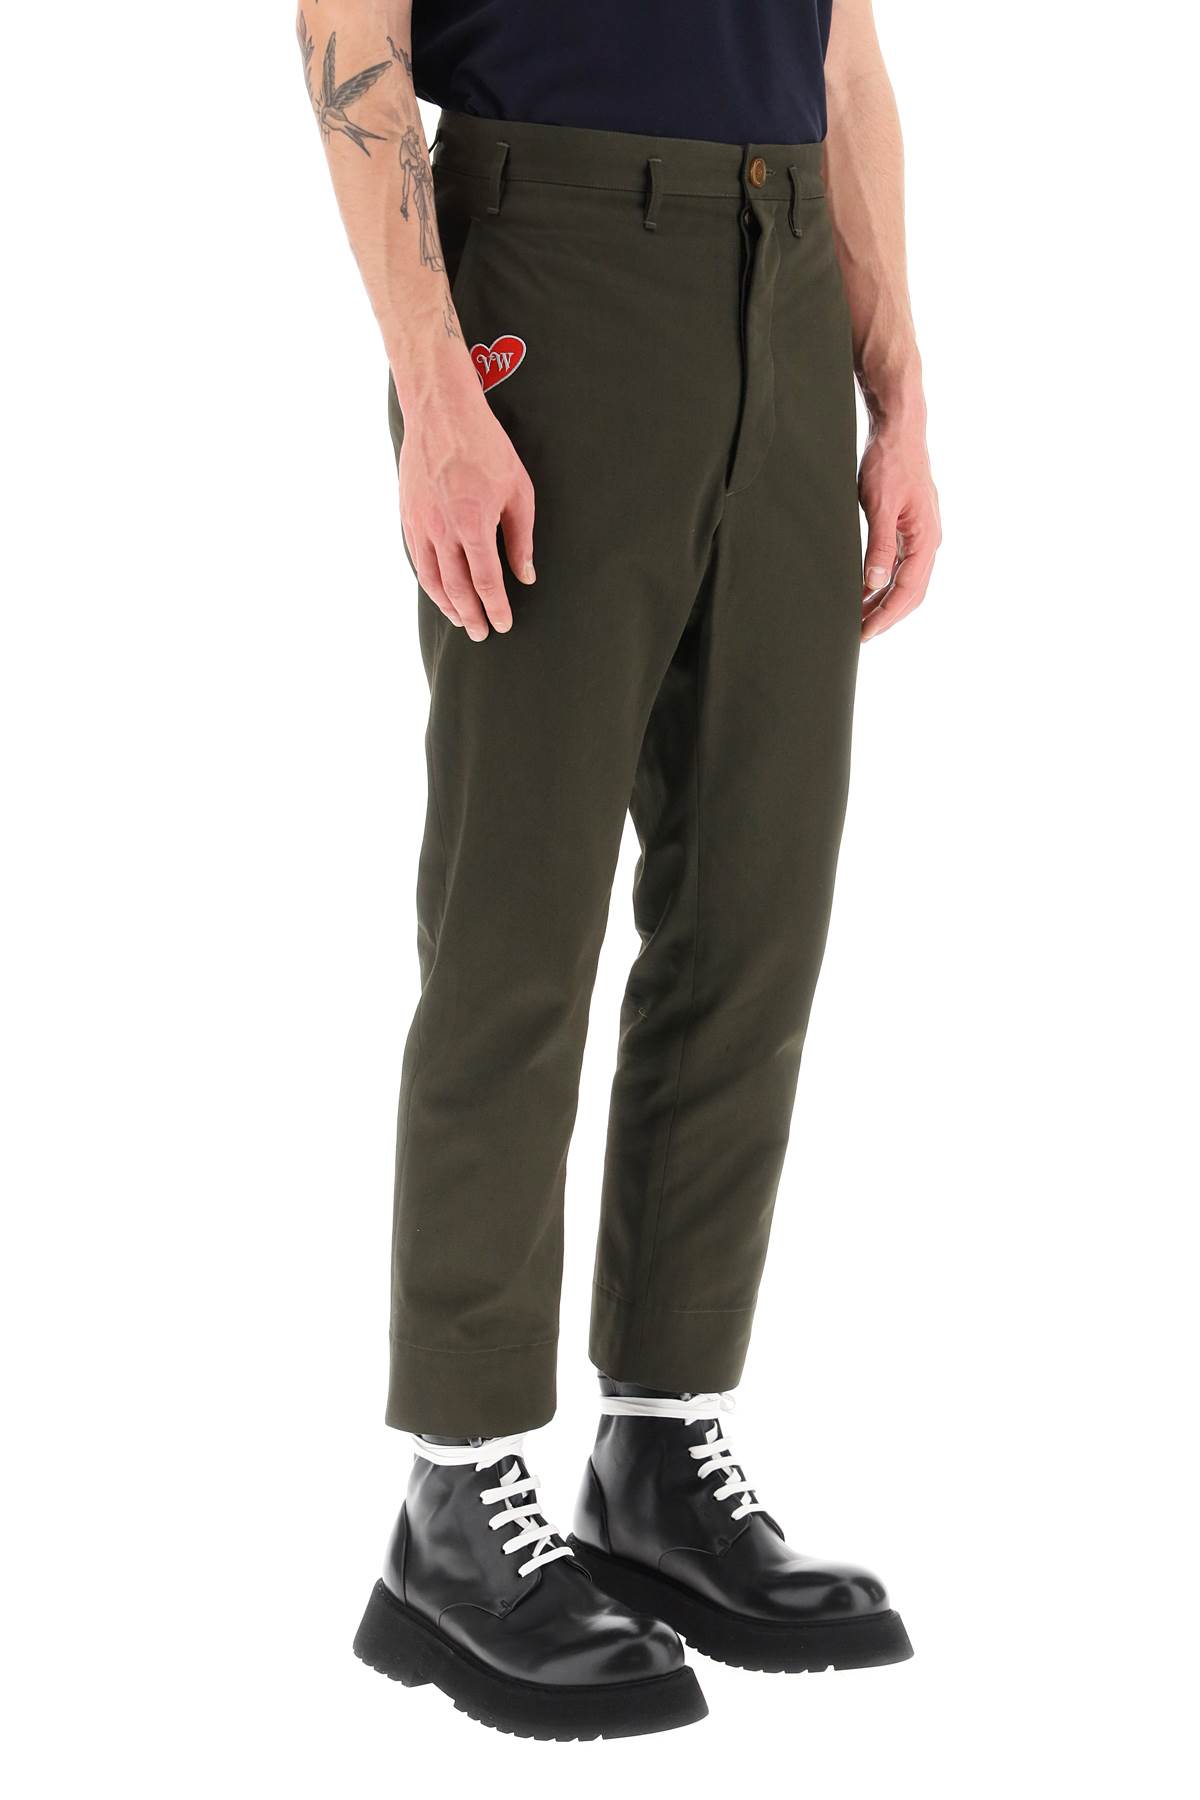 Shop Vivienne Westwood Cropped Cruise Pants Featuring Embroidered Heart-shaped Logo In Military Green (green)